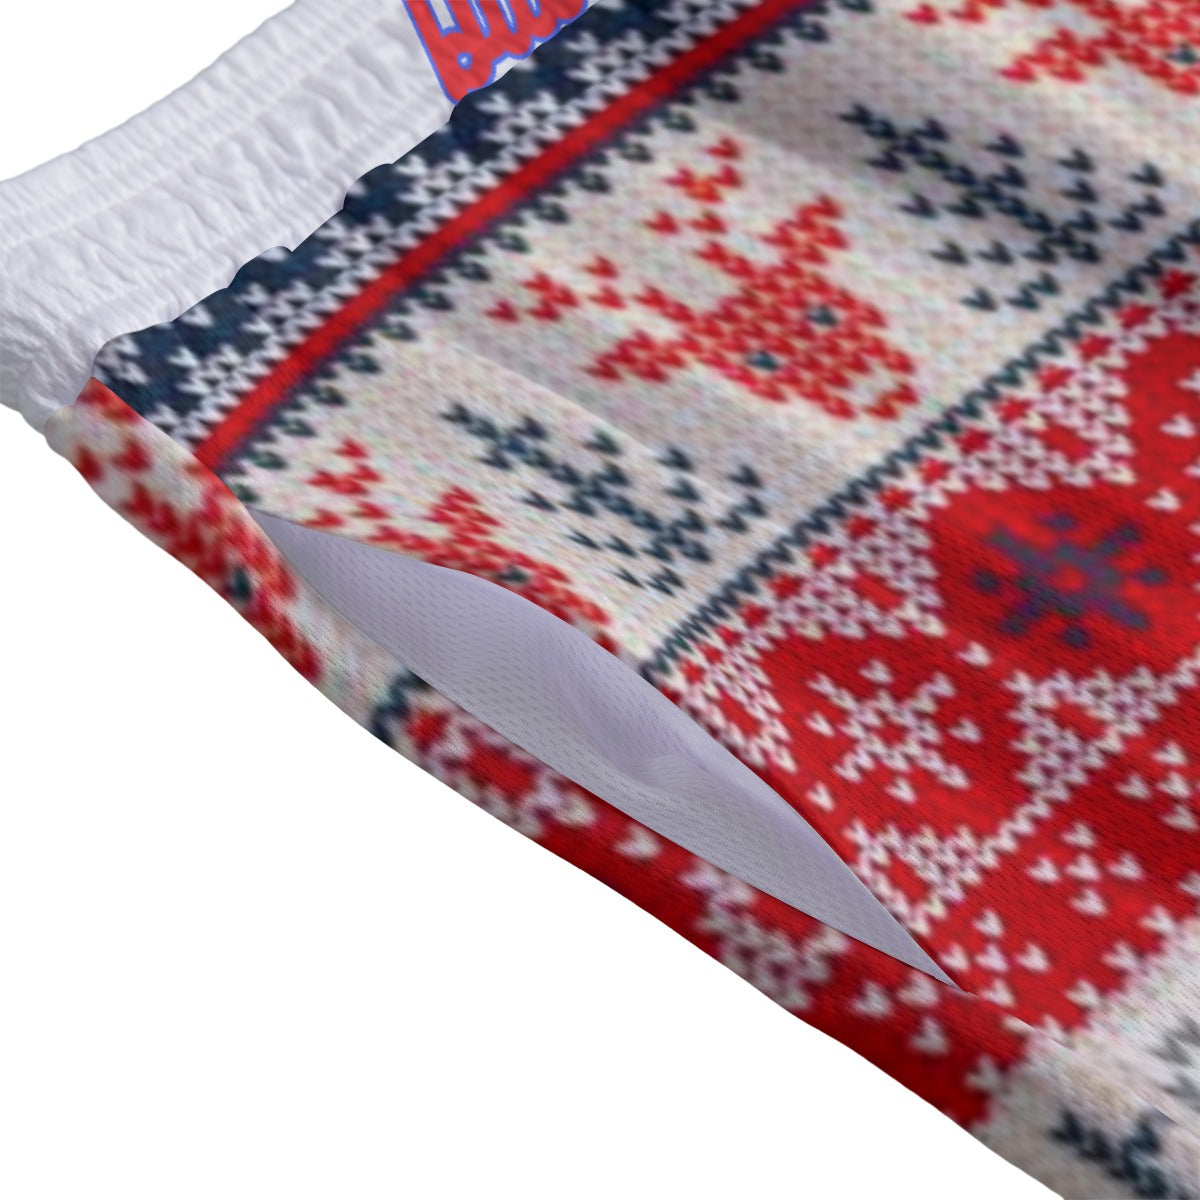 76ers Ugly Christmas Sweater Mesh Shorts